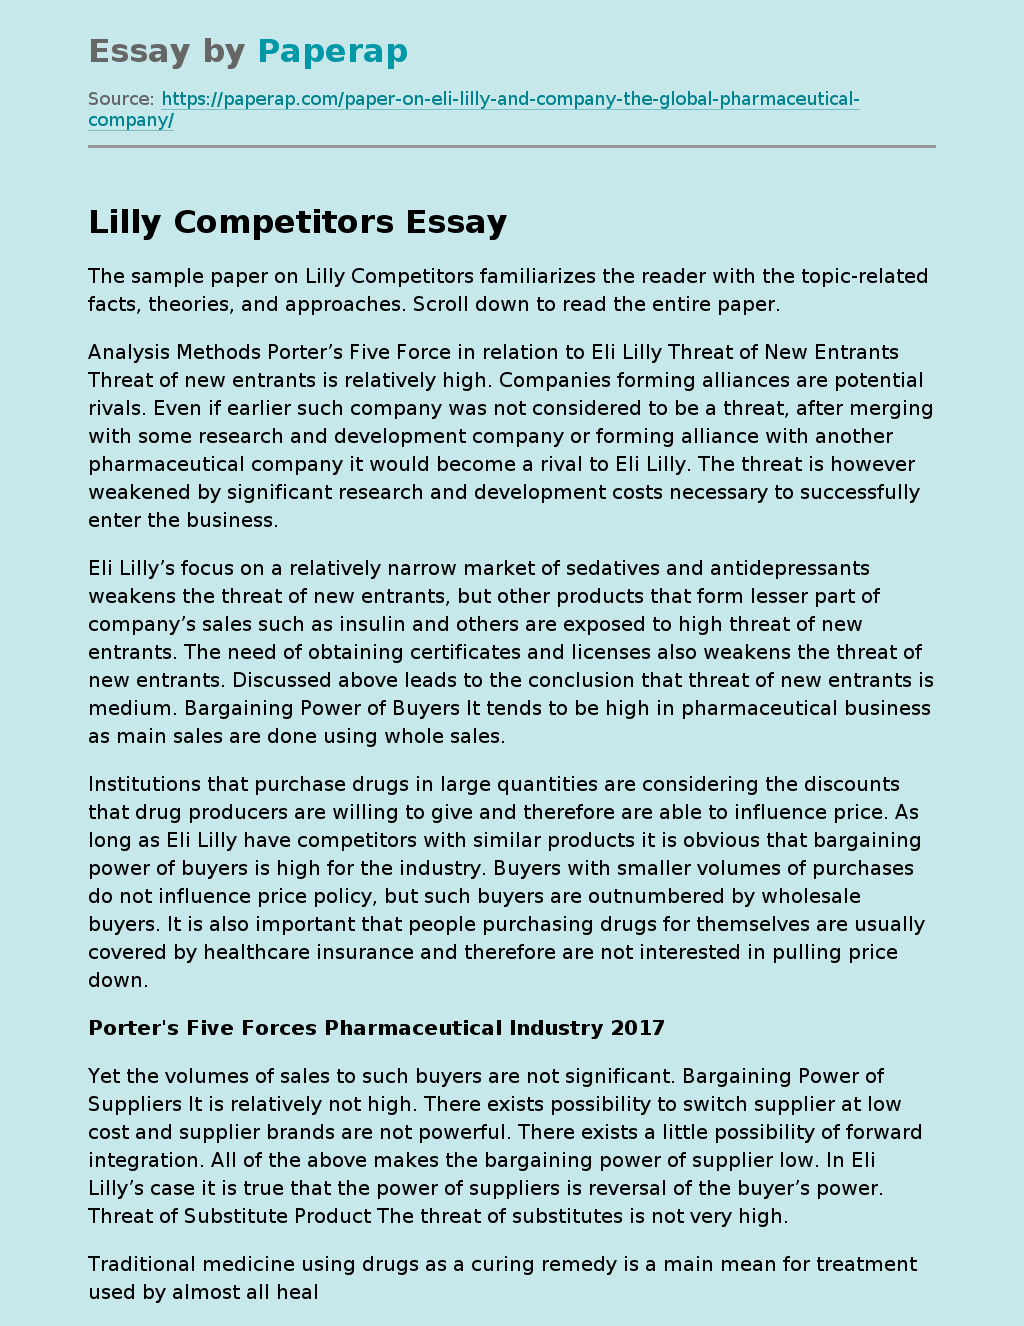 Lilly Competitors